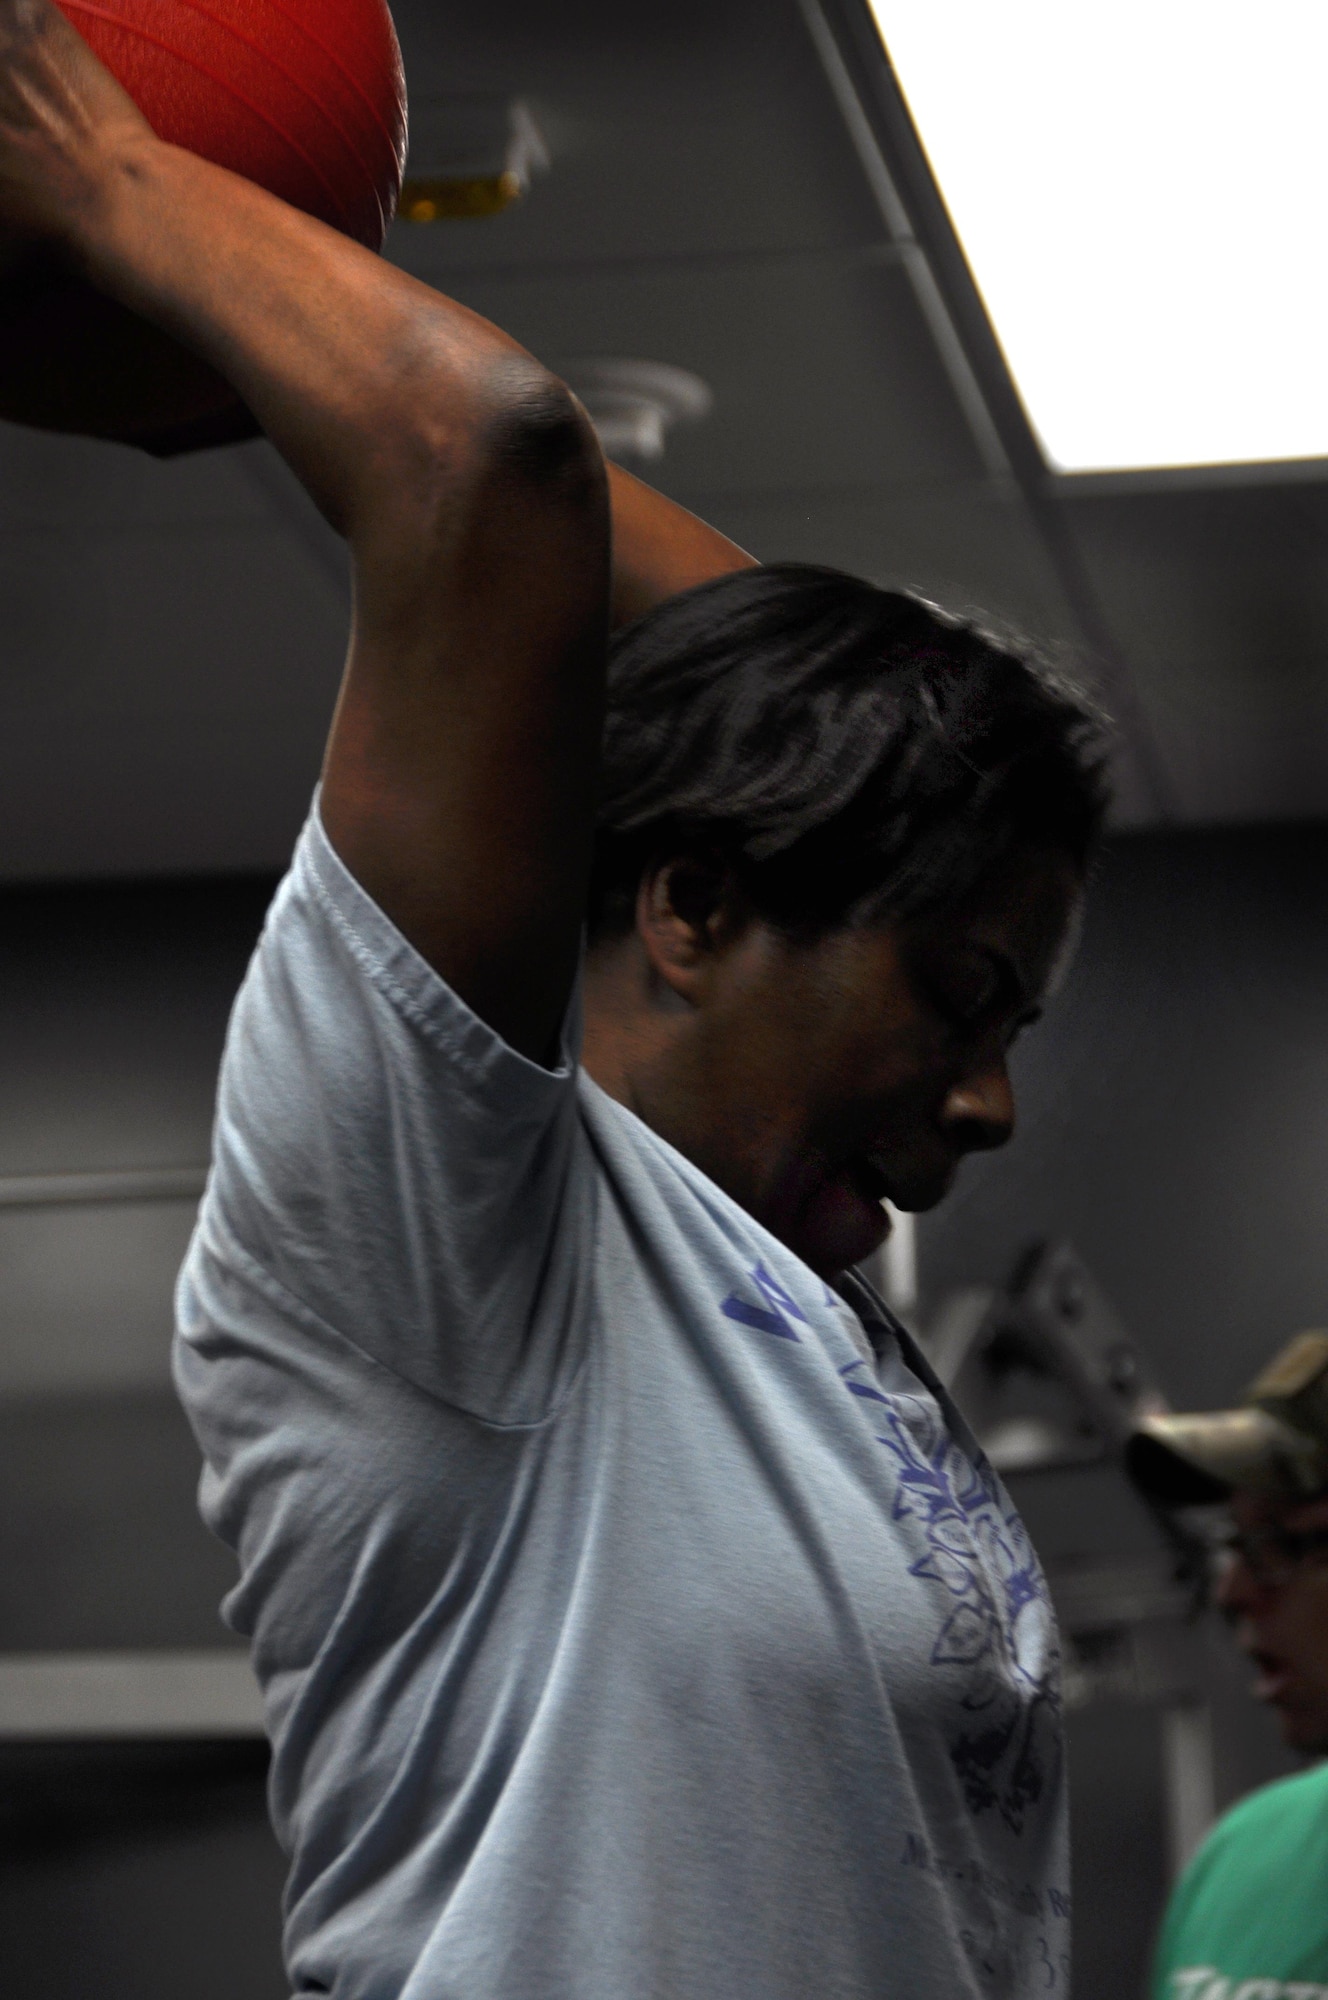 Master Sgt. Michelle McNeill-Wilkerson, member of the Eastern Recruiting Squadron and student of Mikula’s weekly fit camp, participates in circuit training February 25, 2016 at the Human Performance Center of Dobbins Air Reserve Base, Ga. Instructor John Mikula creates various level workouts for all participants. (U.S. Air Force photo by Senior Airman Lauren Douglas) 